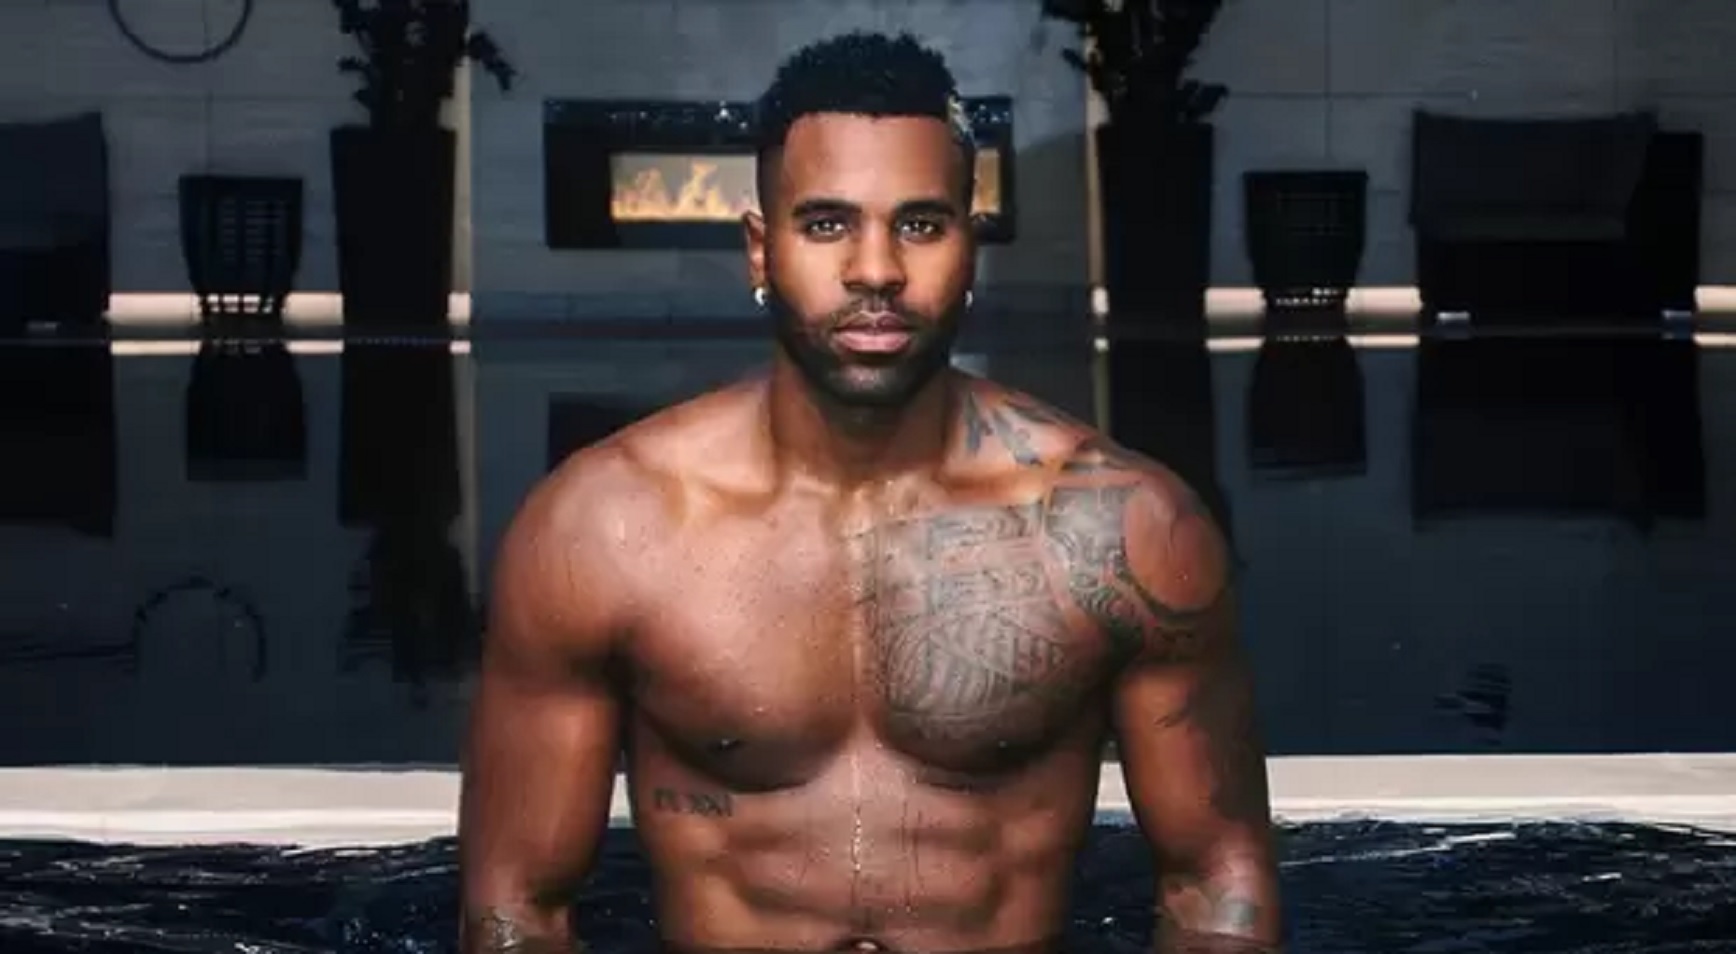 Jason Derulo Offered $500,000 By Adult Website to Post More Like His Deleted ‘D*ck Pic’